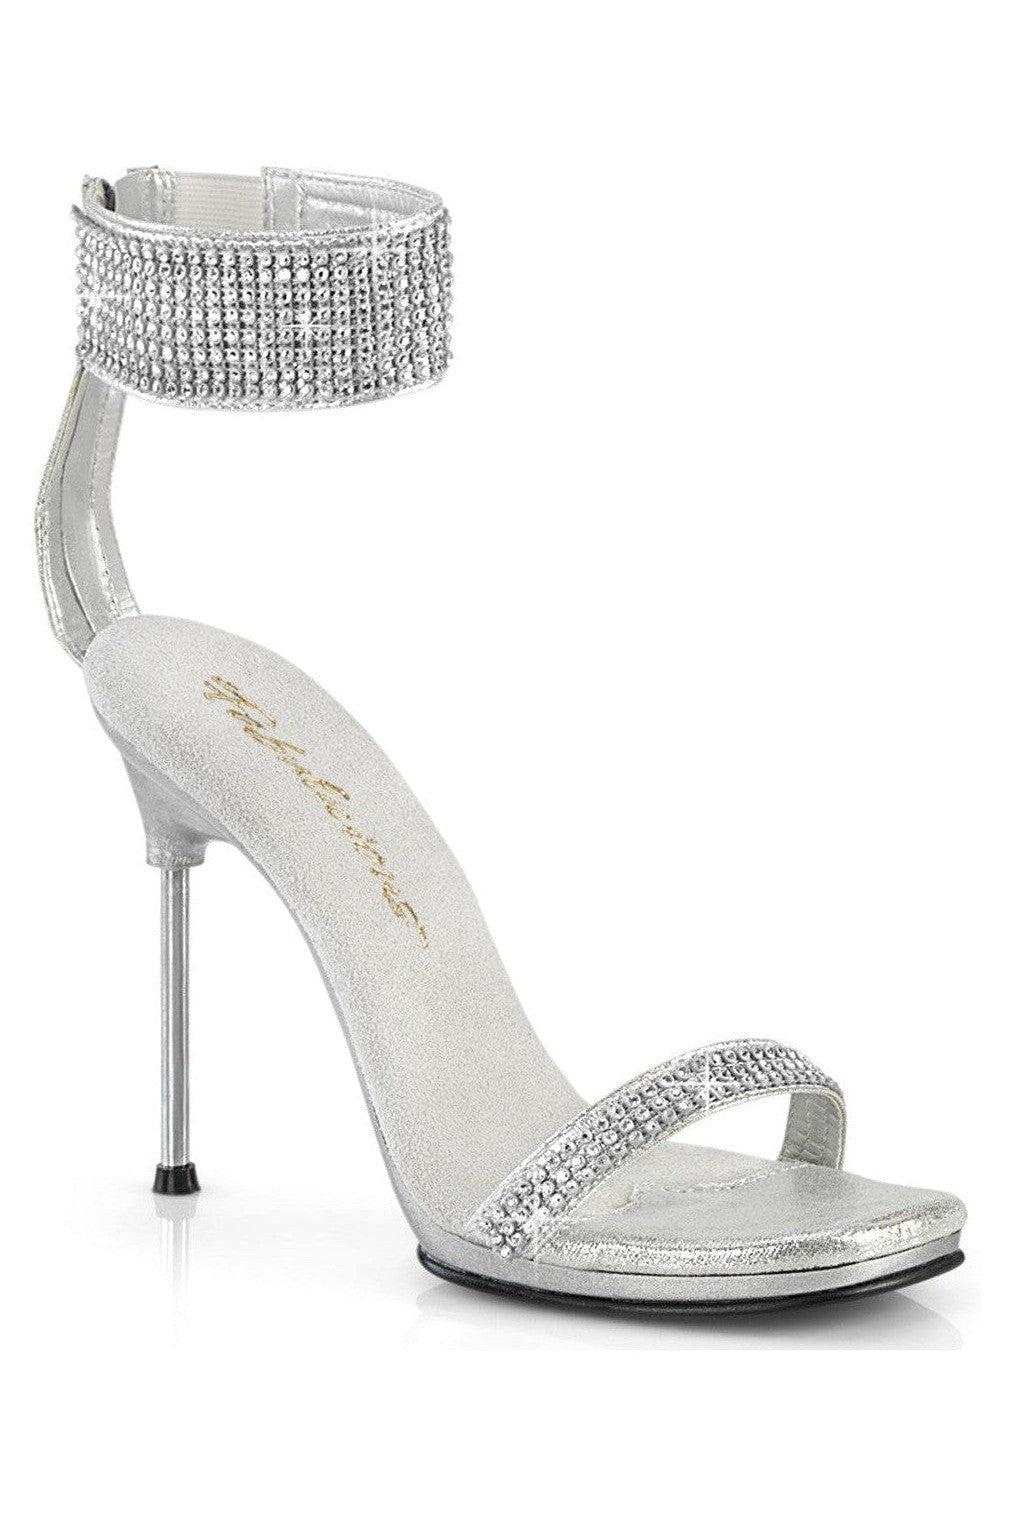 Fabulicious Silver Sandals Platform Stripper Shoes | Buy at Sexyshoes.com